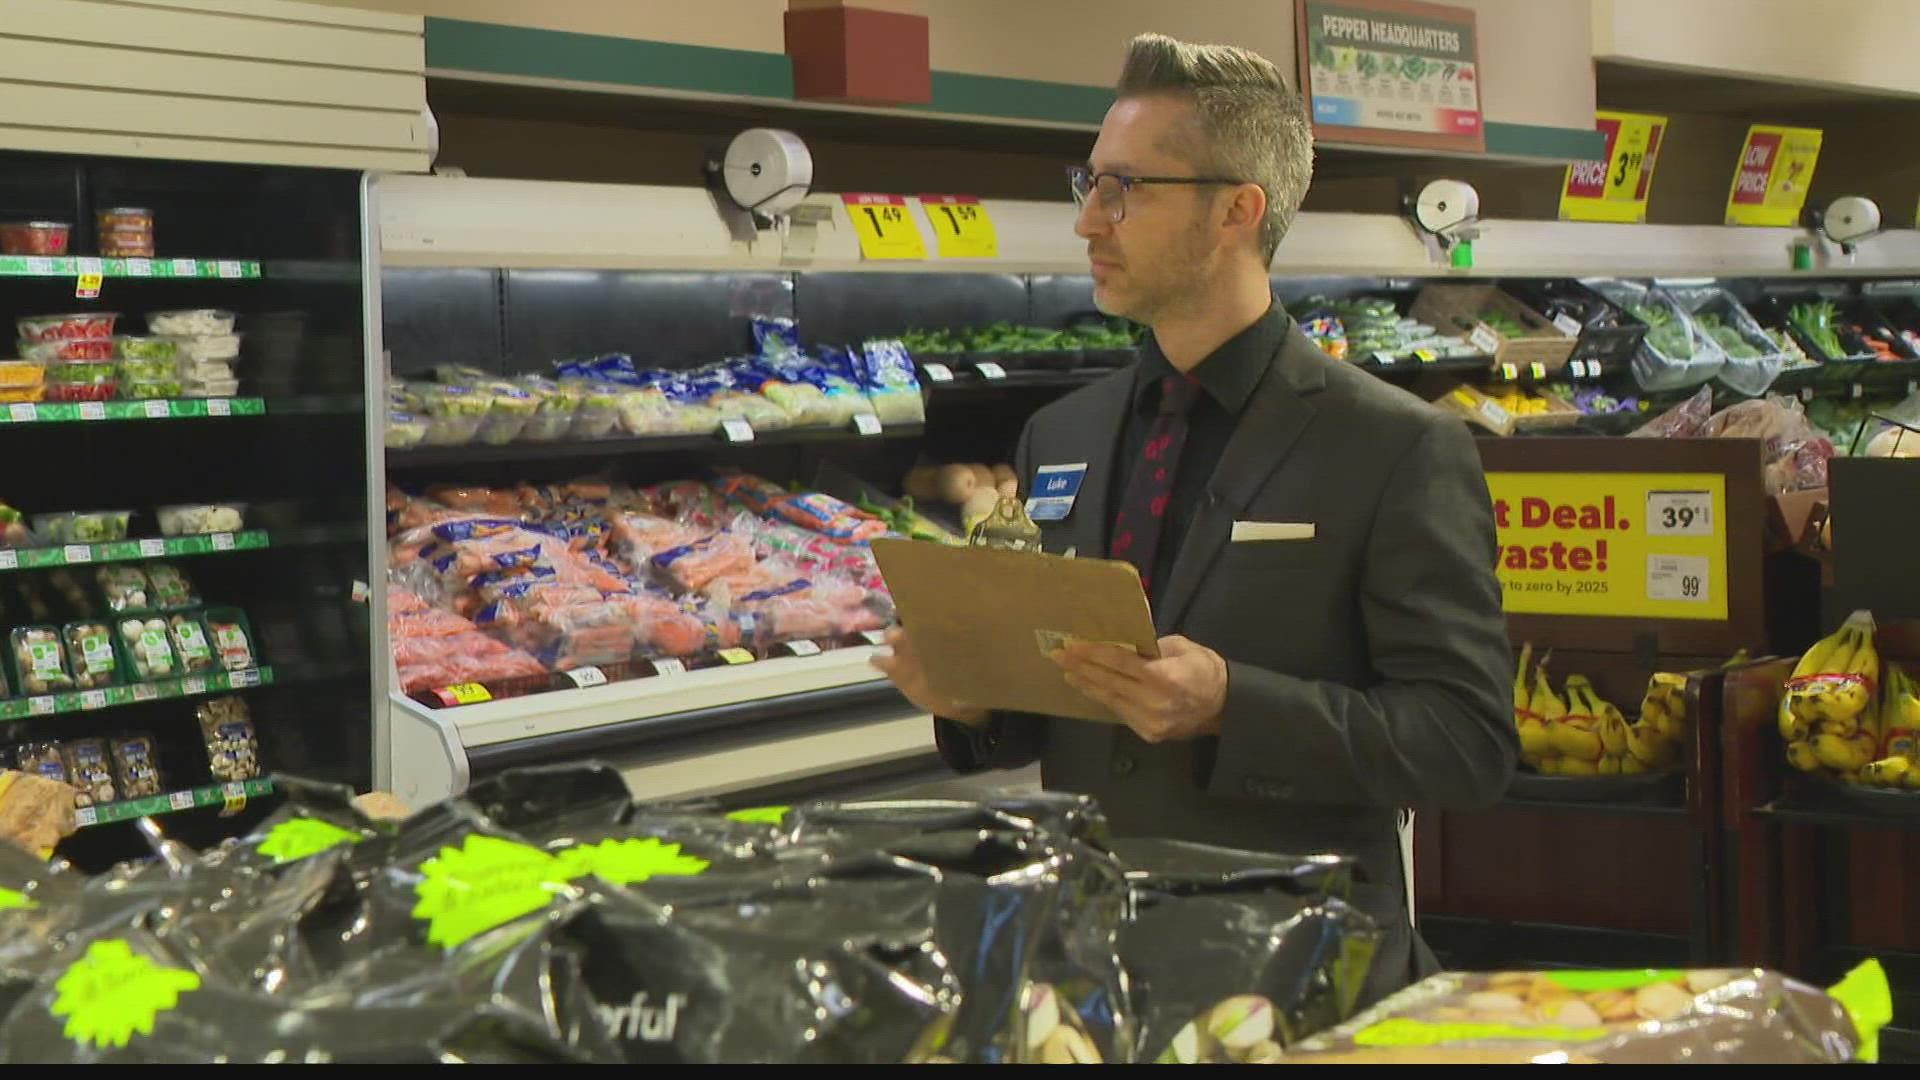 Luke Wass went from running a local steakhouse to running groceries out to Kroger customers during the COVID-19 pandemic — and is quickly rising through the ranks.